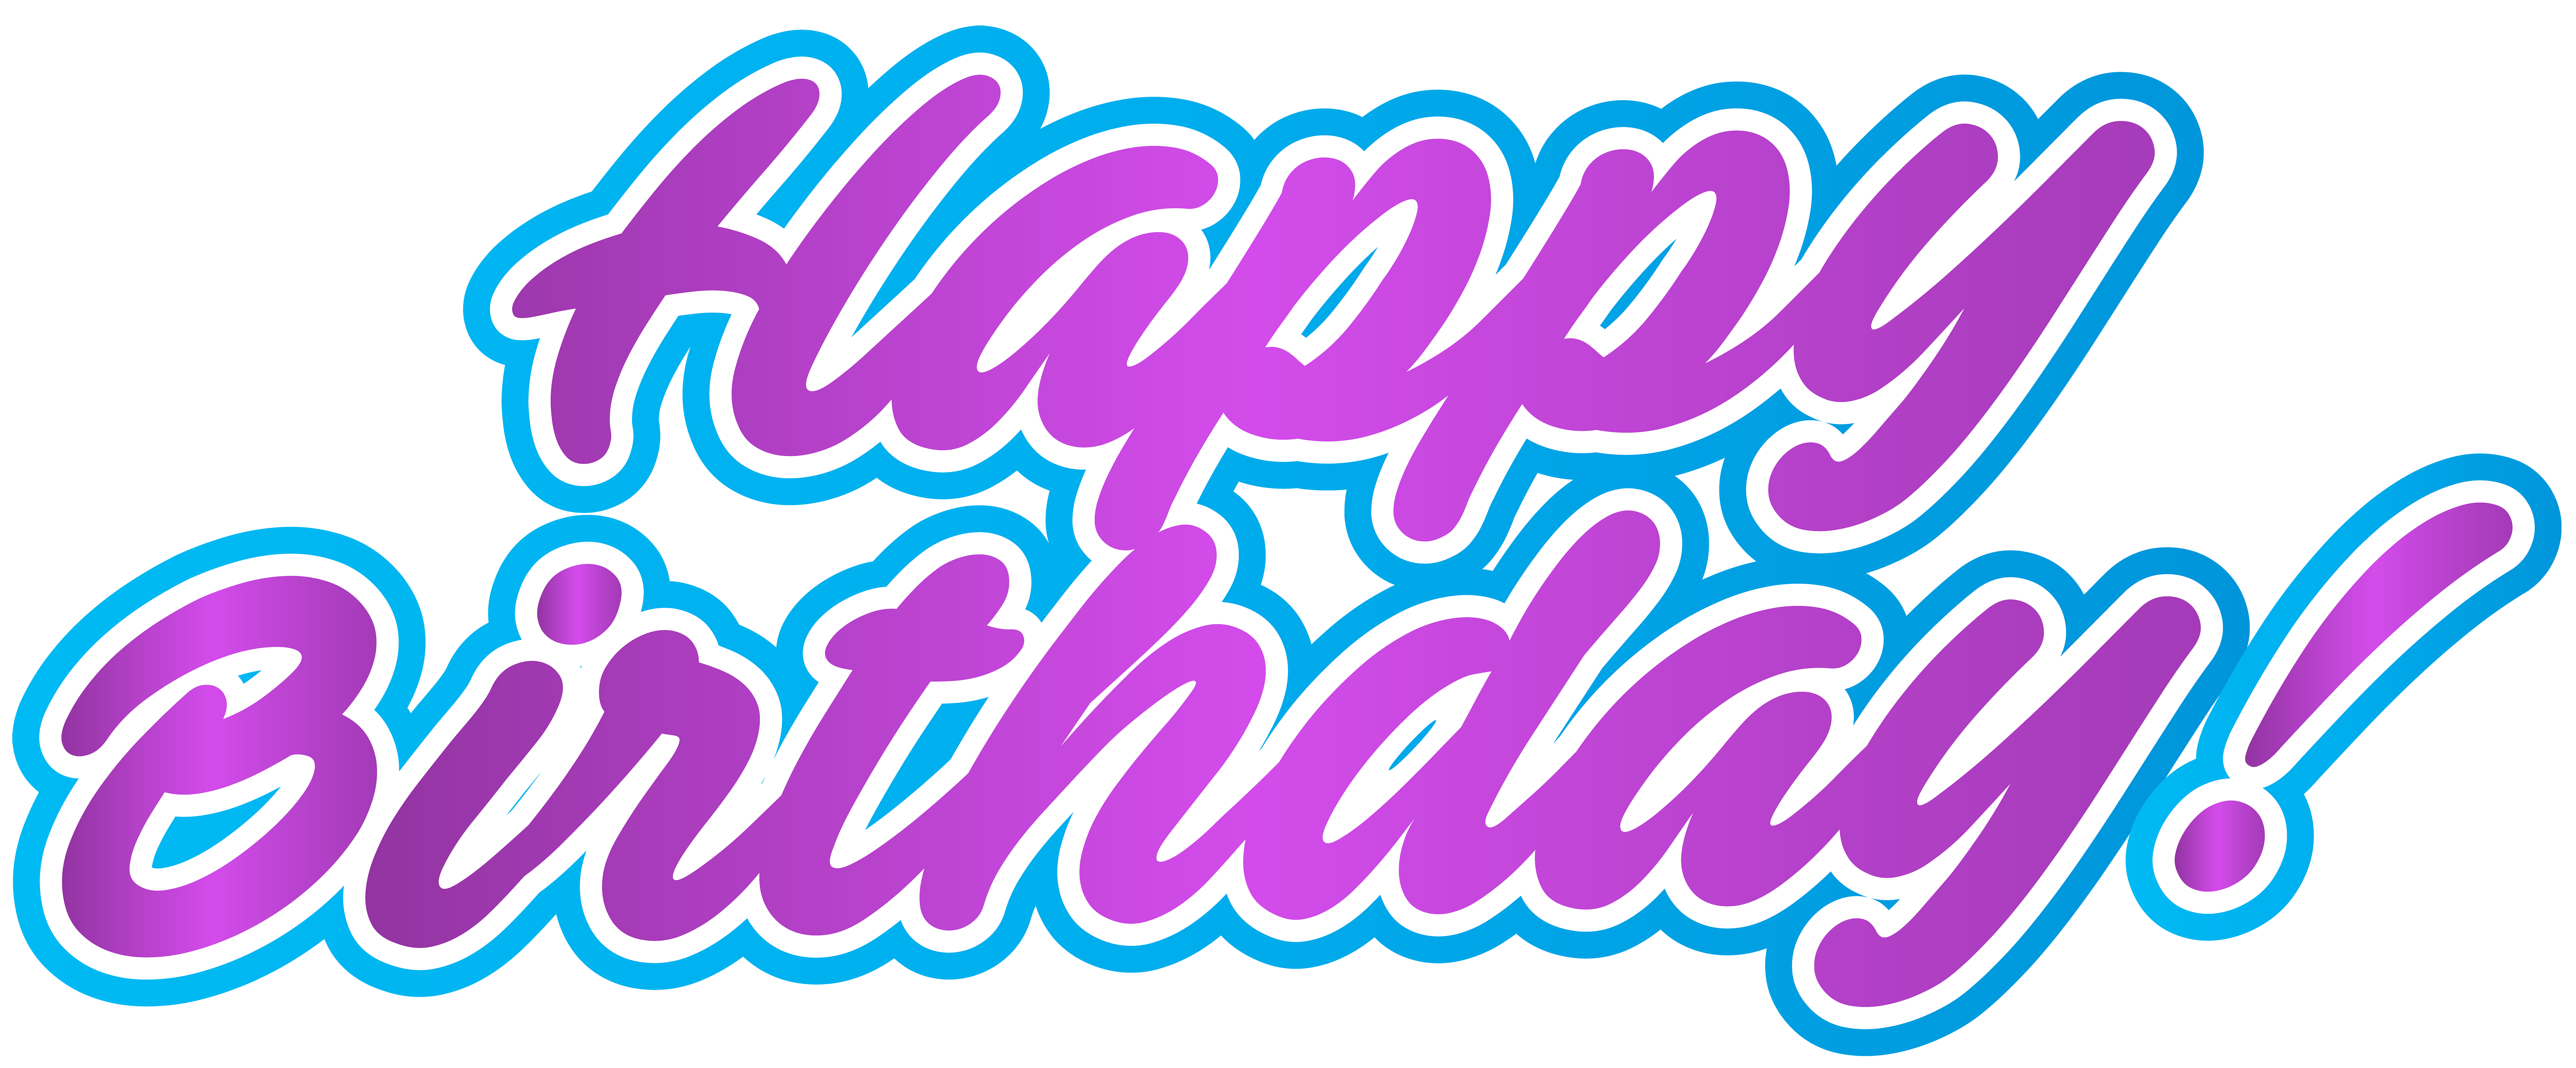 Happy Birthday Pink Blue Clip Art PNG Image.